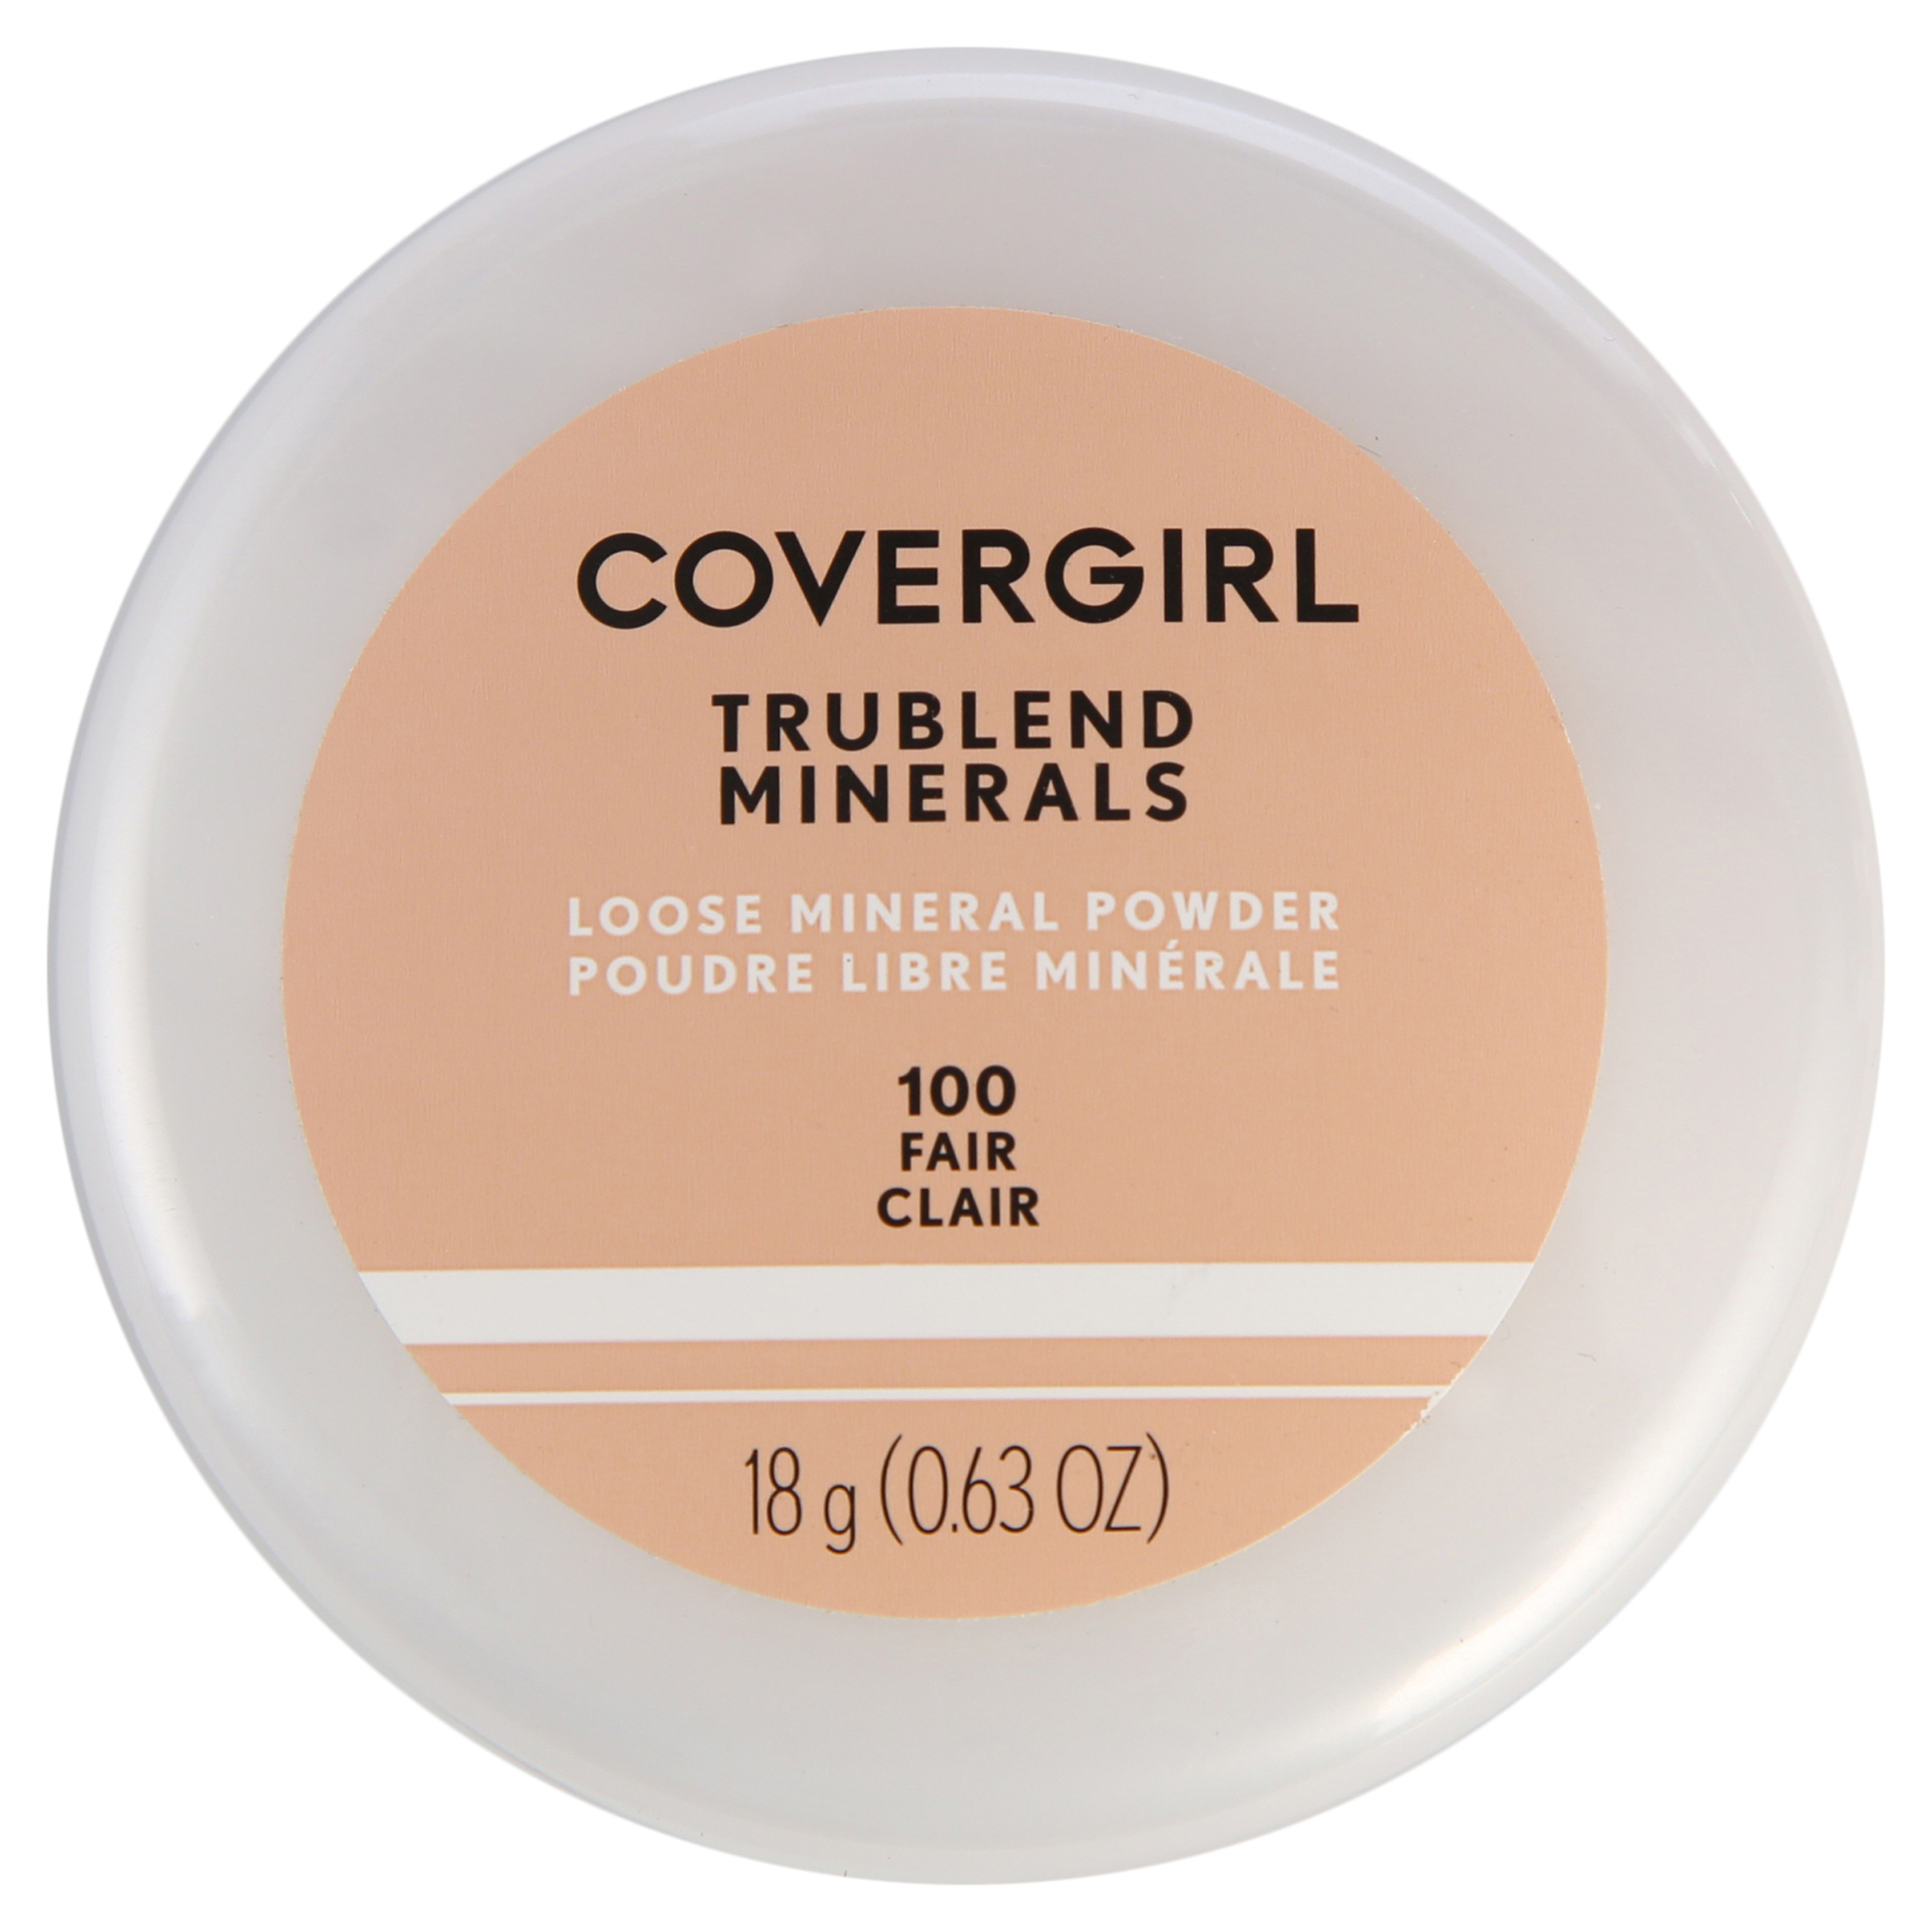 COVERGIRL TruBlend Loose Mineral Powder, 100 Fair, 0.63 oz, Setting Powder, Loose Powder, Enriched with Minerals, Easy Application, Soft, Even-Toned, Fresh Complextion - image 1 of 7